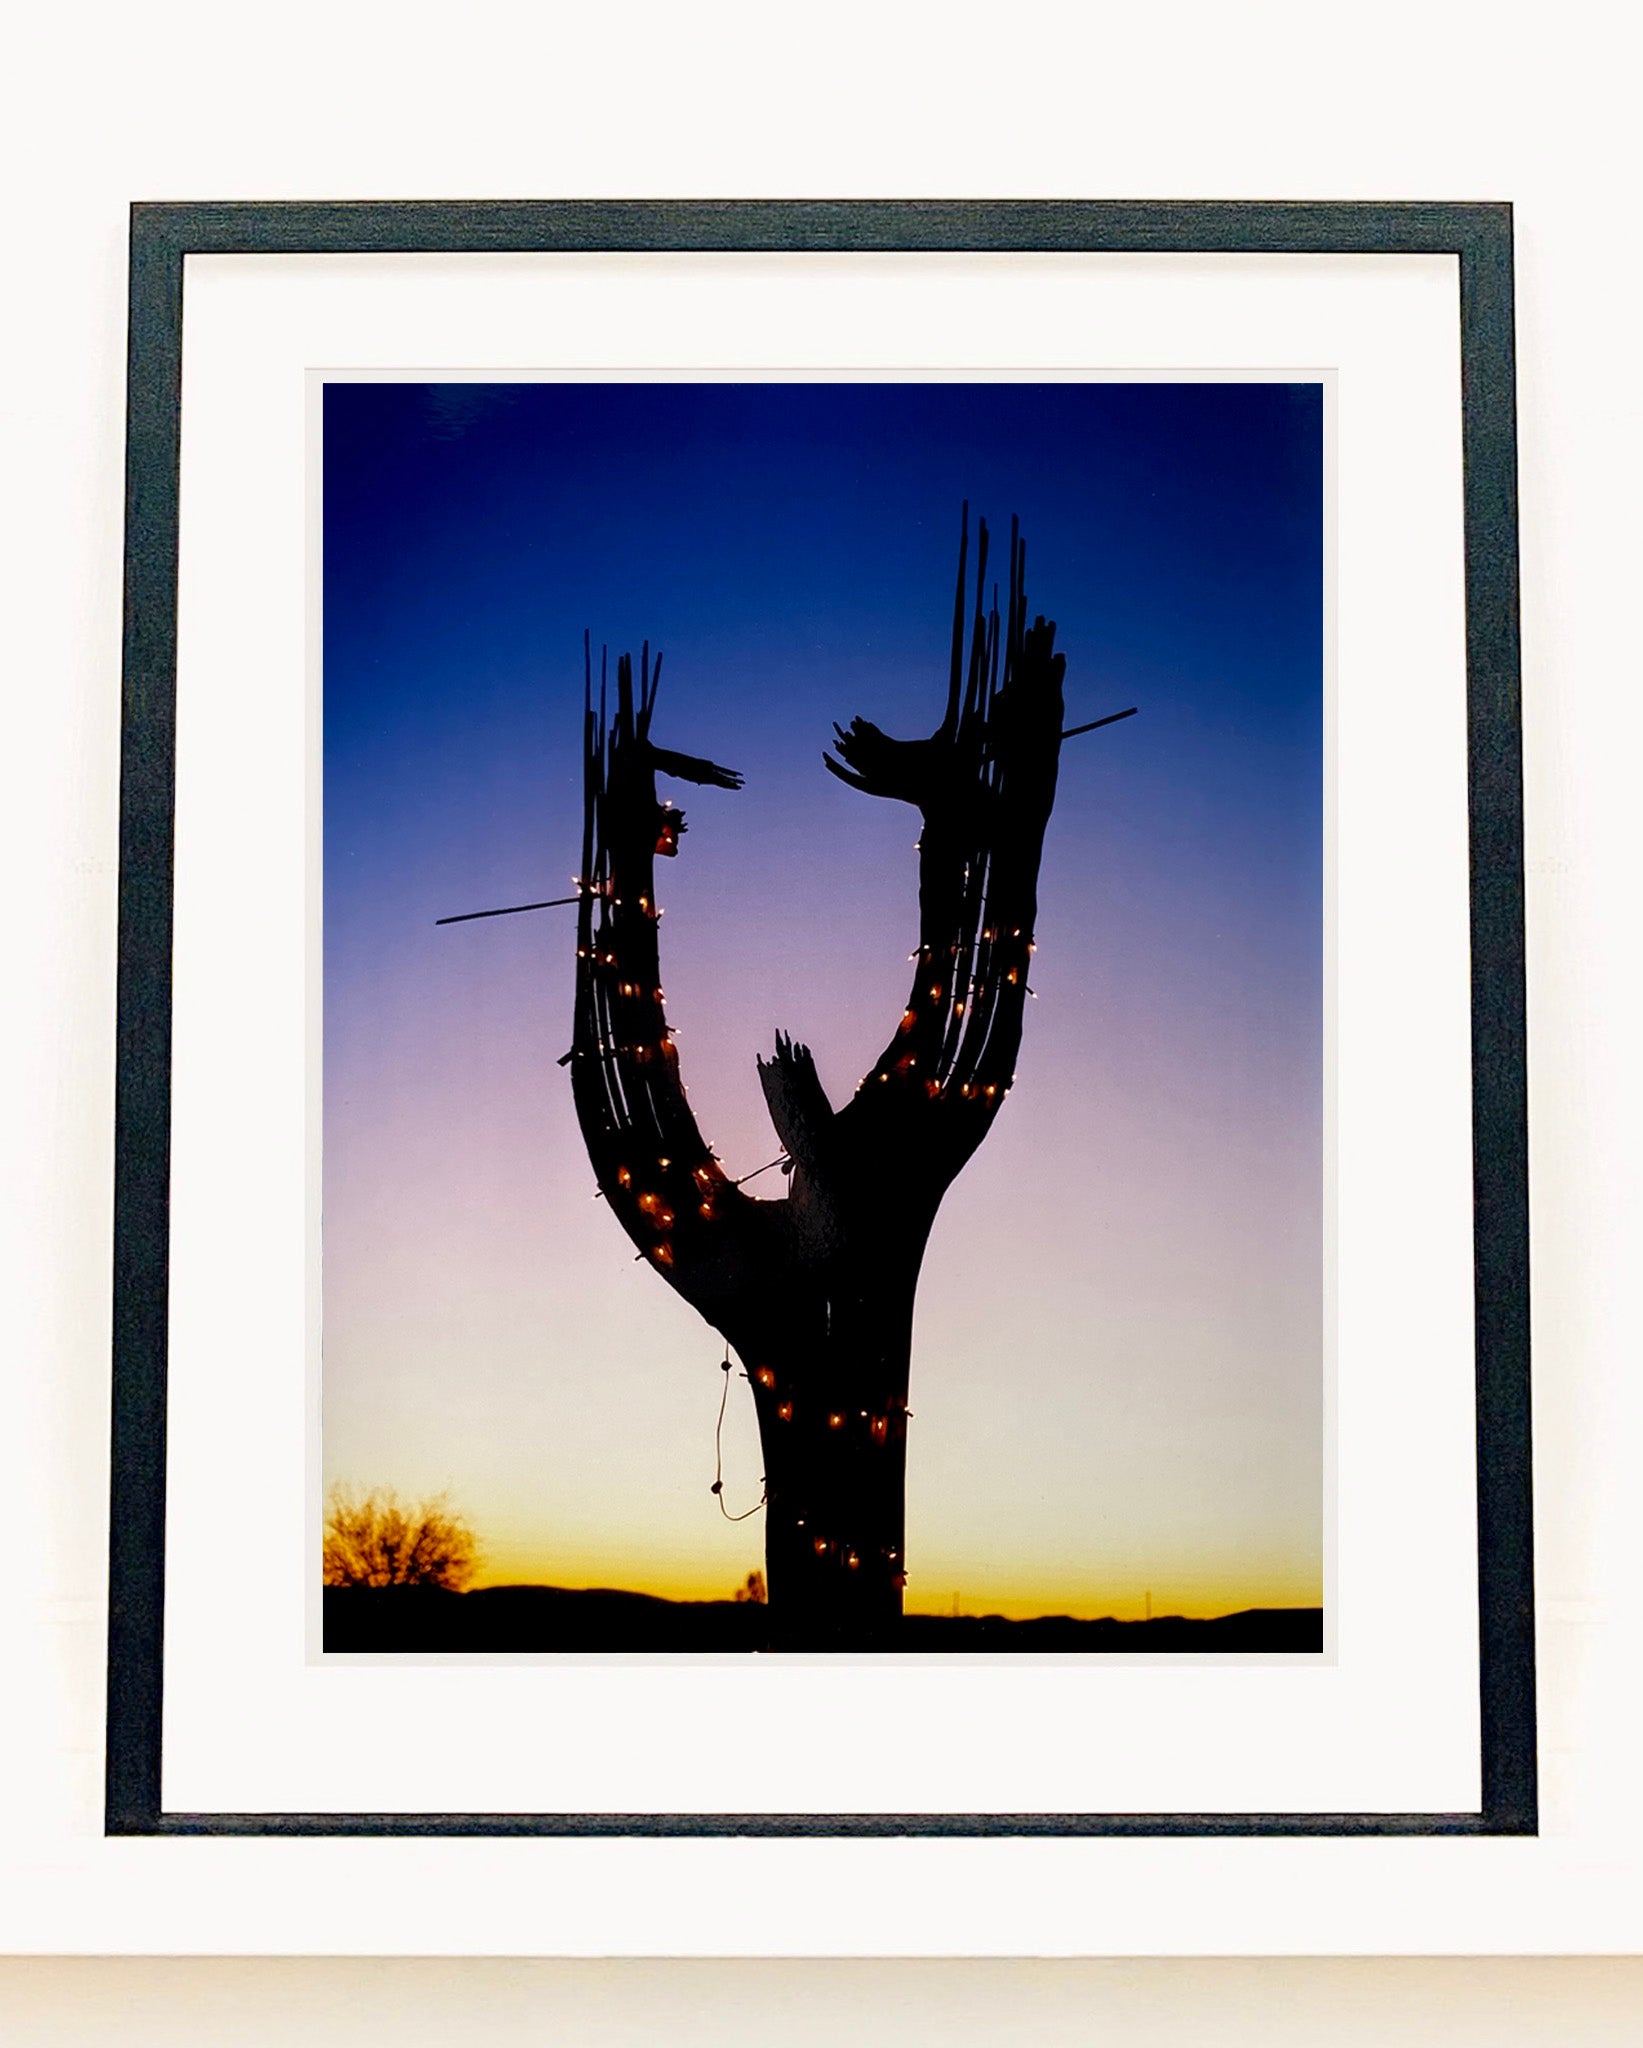 The silhouette of a large scale cactus, dressed in twinkle lights, set against an ombre twilight sky. Photographed by Richard Heeps in the Arizona desert, for his 'Dream in Colour' series.